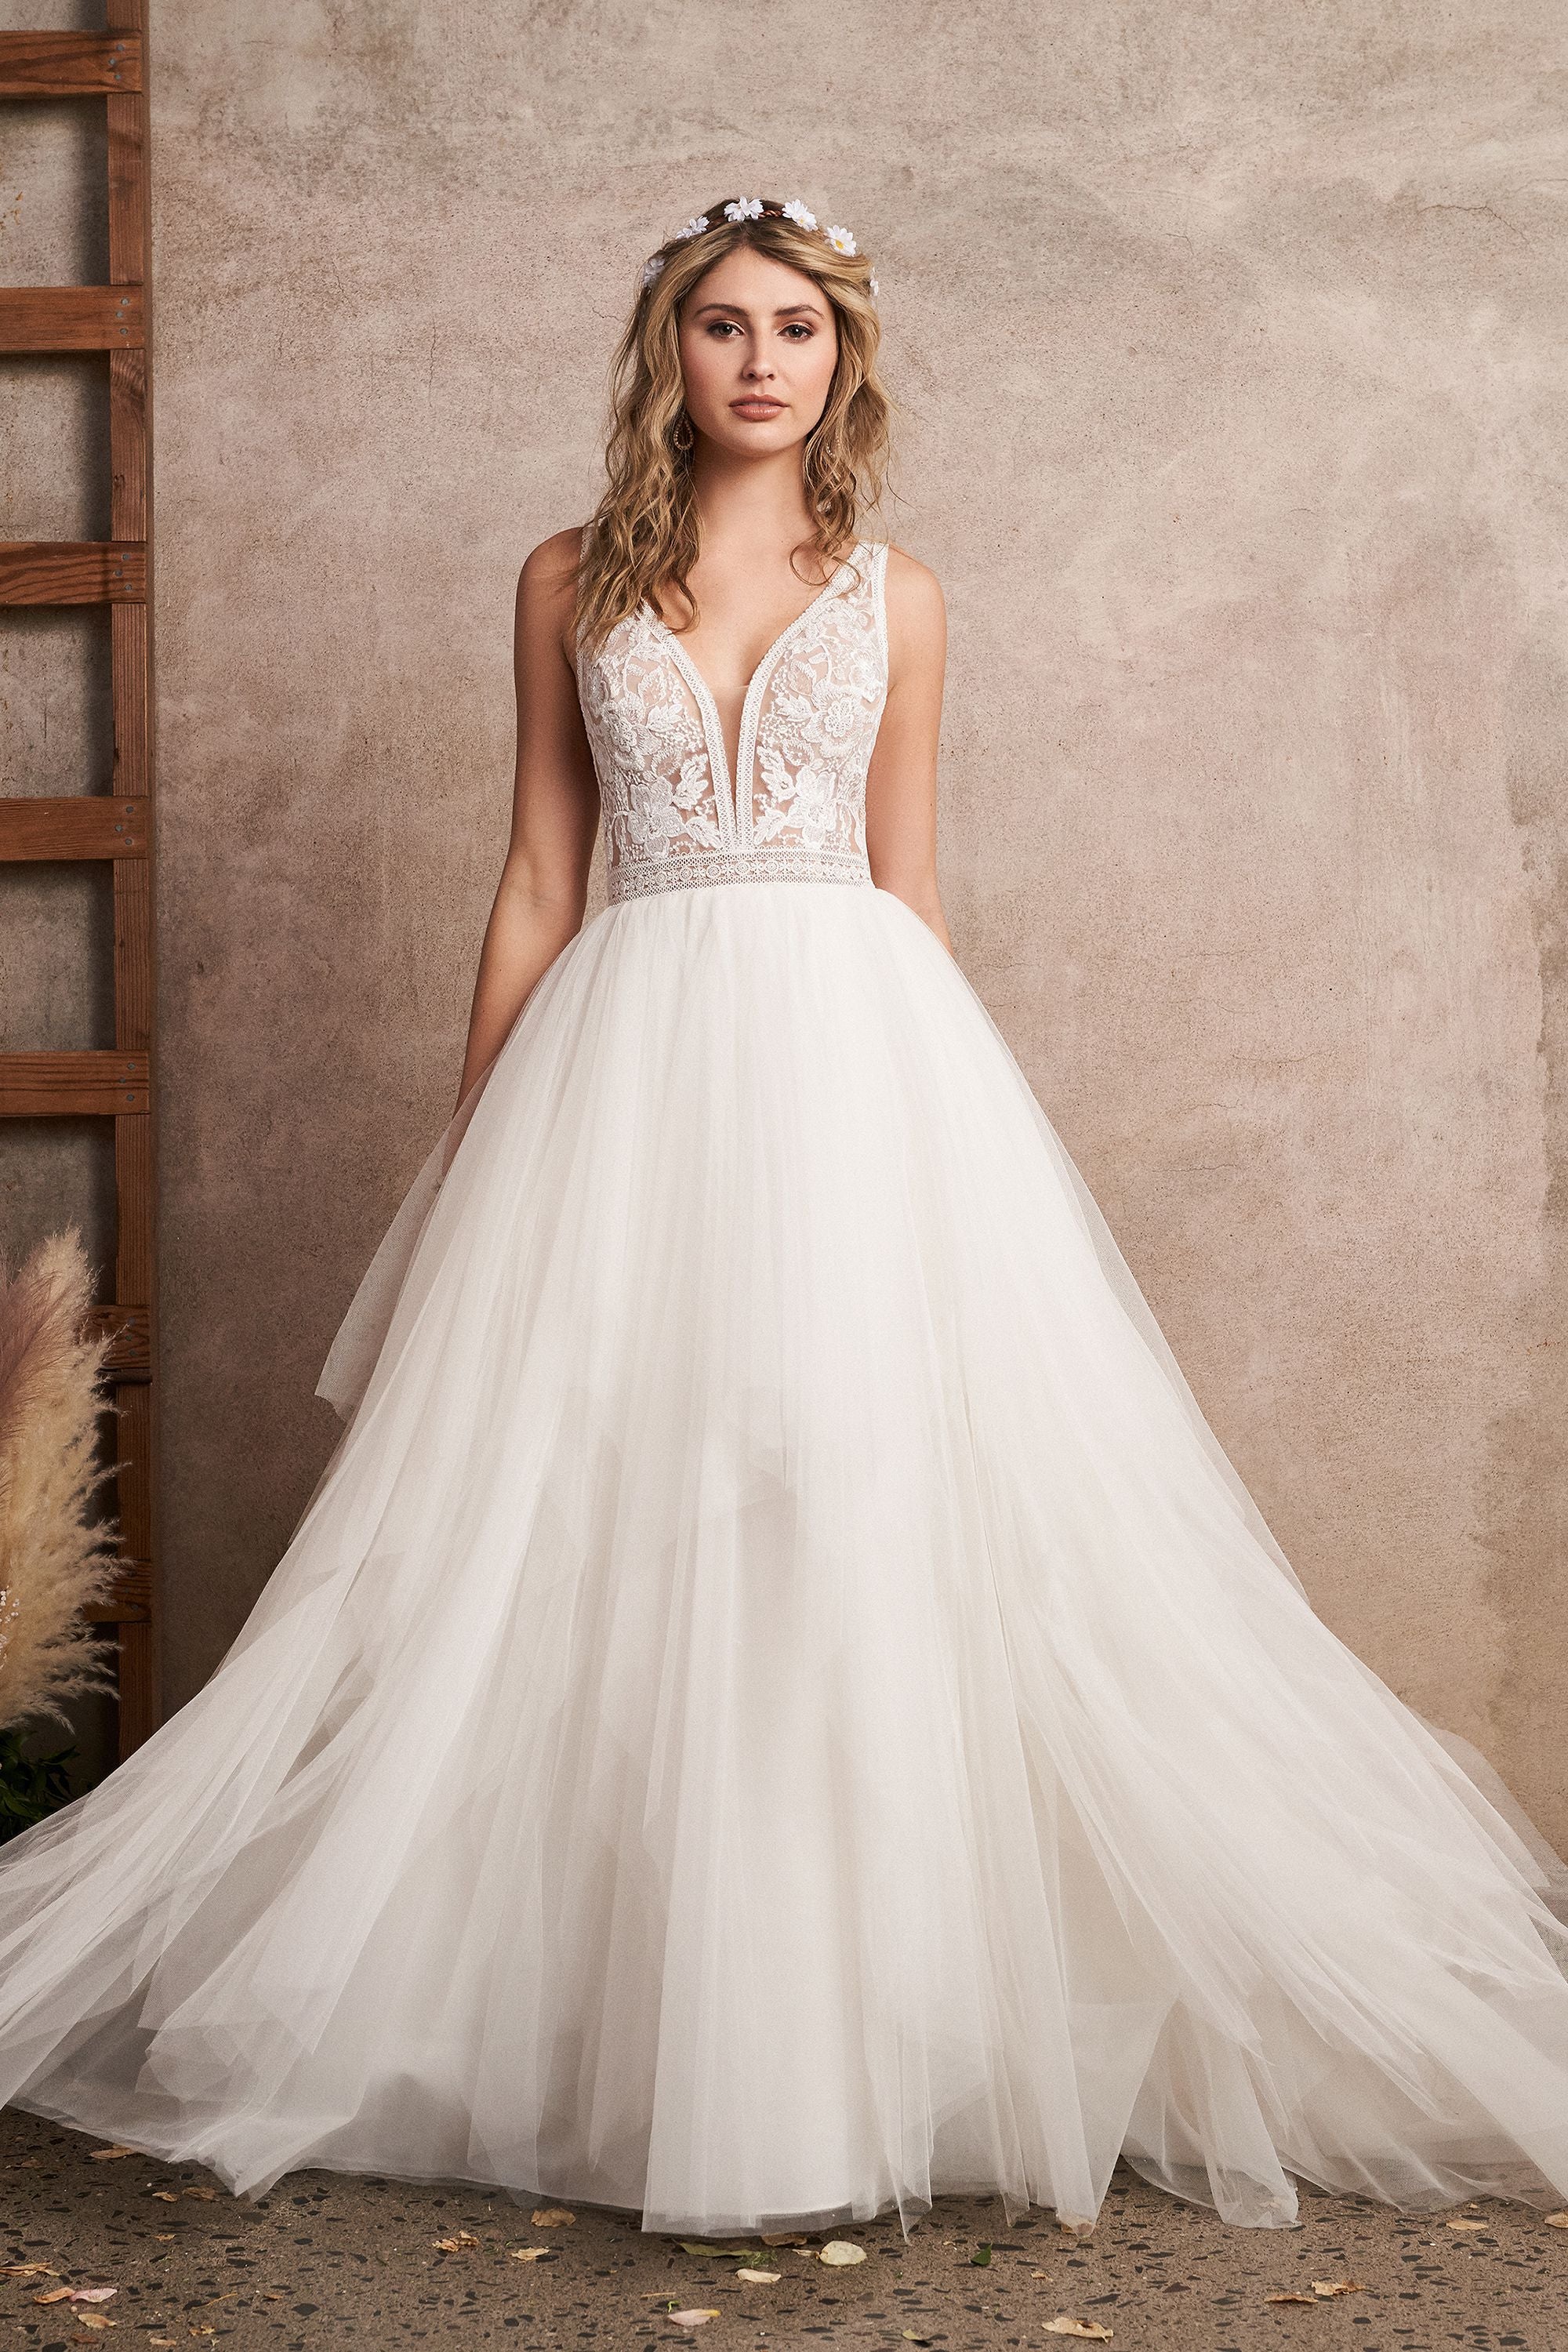 Plunging V-Neck Bridal Gown with Tulle Handkerchief Skirt by